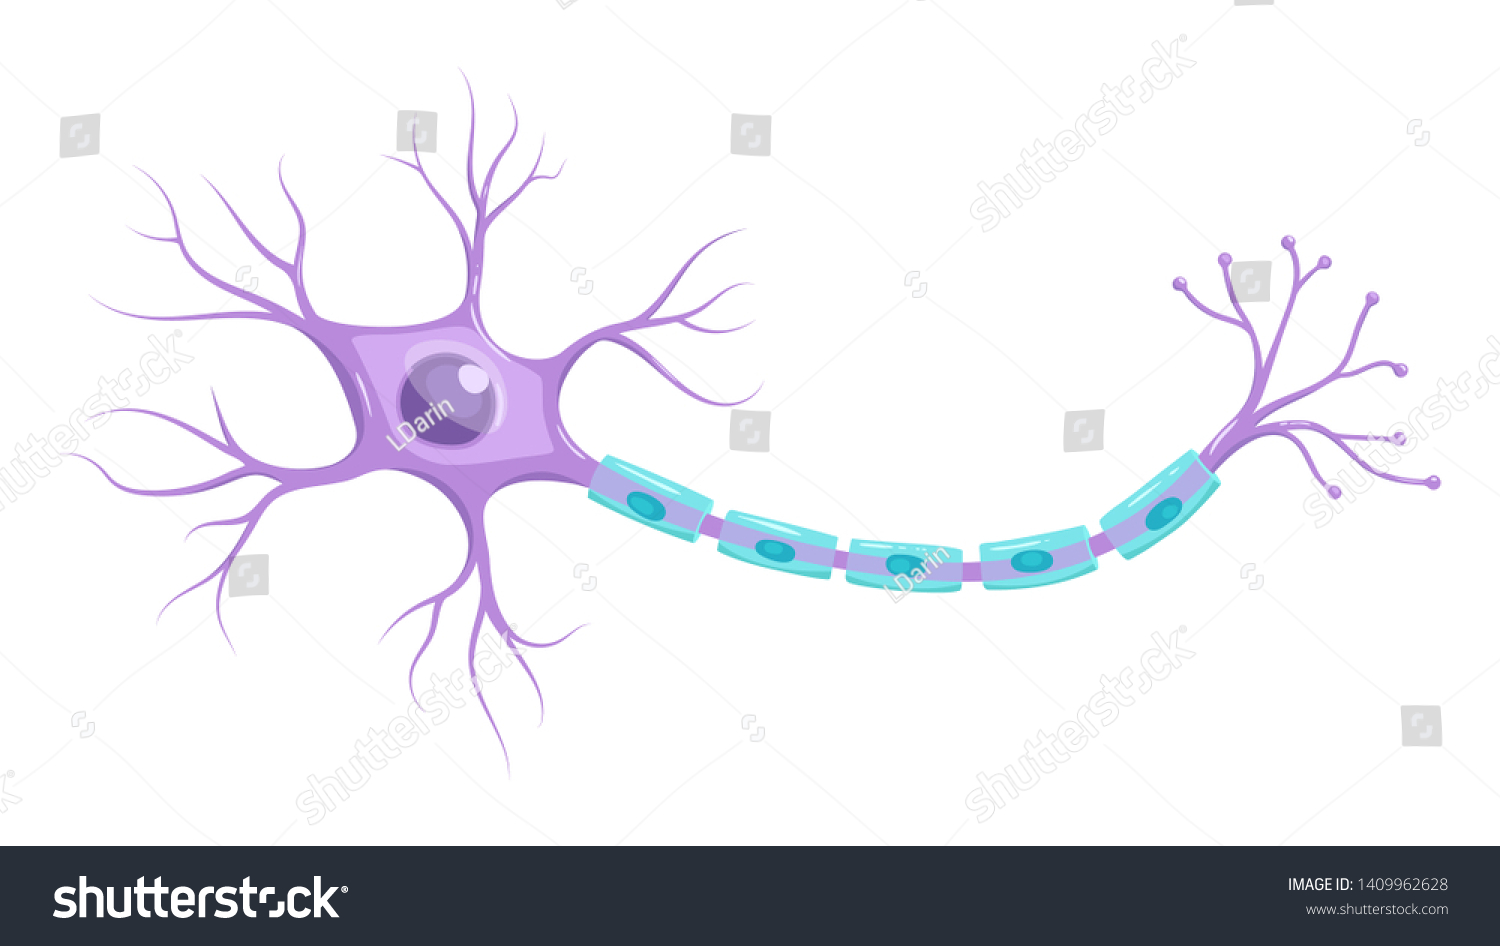 SVG of Illustration of neuron anatomy. Vector infographic (nerve cell axon and myelin sheath) svg